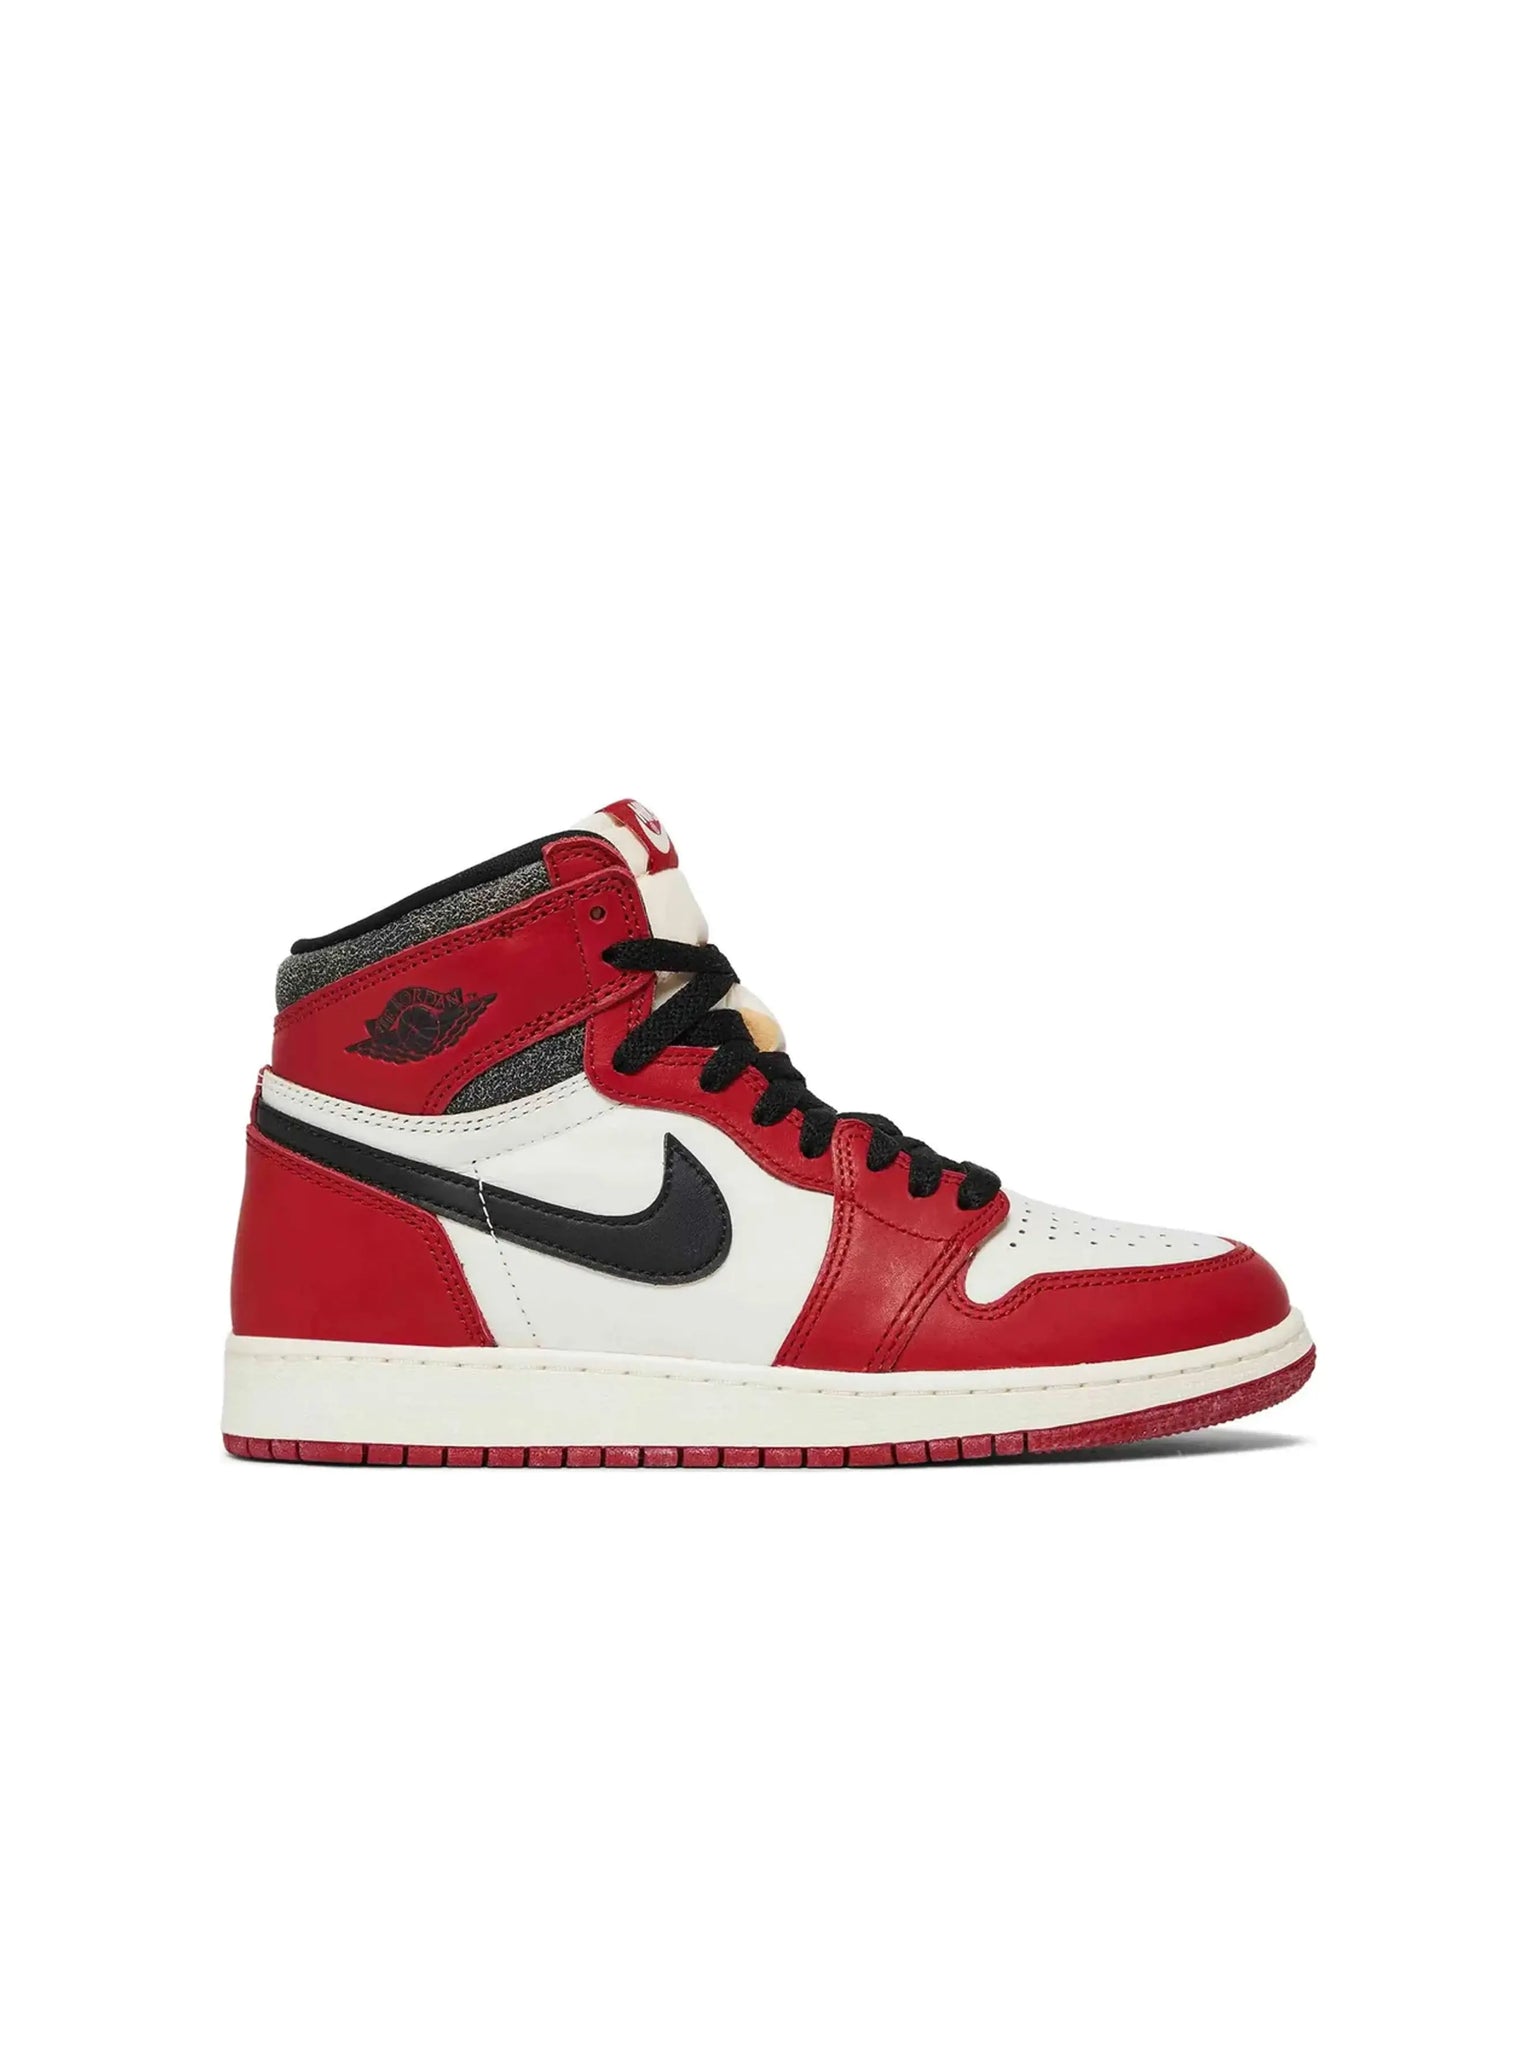 Nike Air Jordan 1 Retro High OG Chicago Lost and Found (GS) in Auckland, New Zealand - Shop name